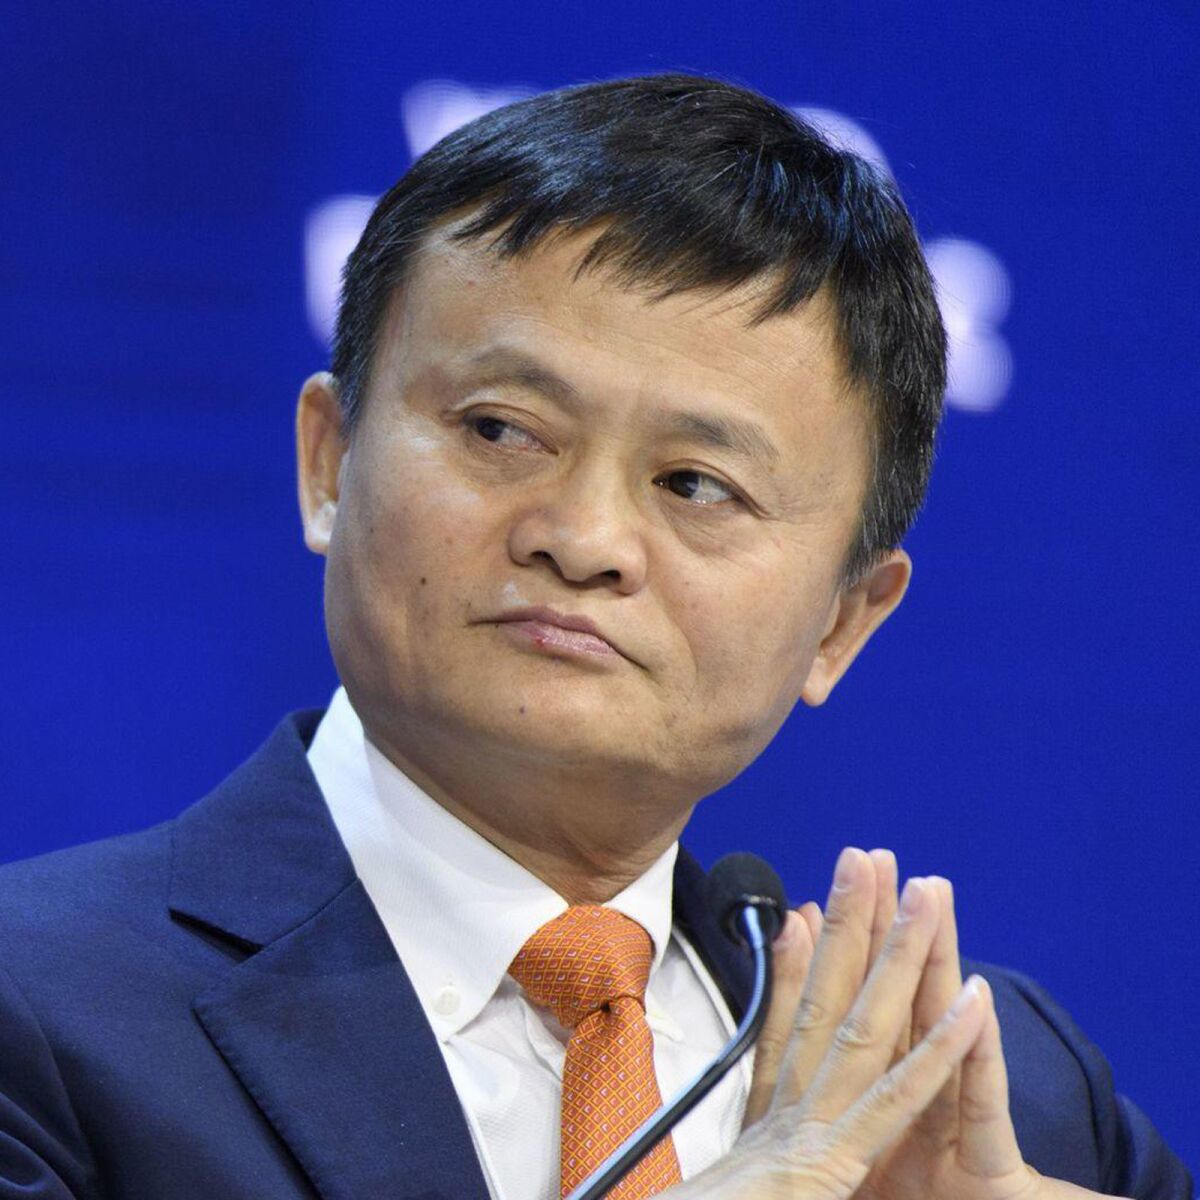 China's Jack Ma, founder of Alibaba Group, speaks during the 48th annual meeting of the World Economic Forum in Davos, Switzerland, in January.